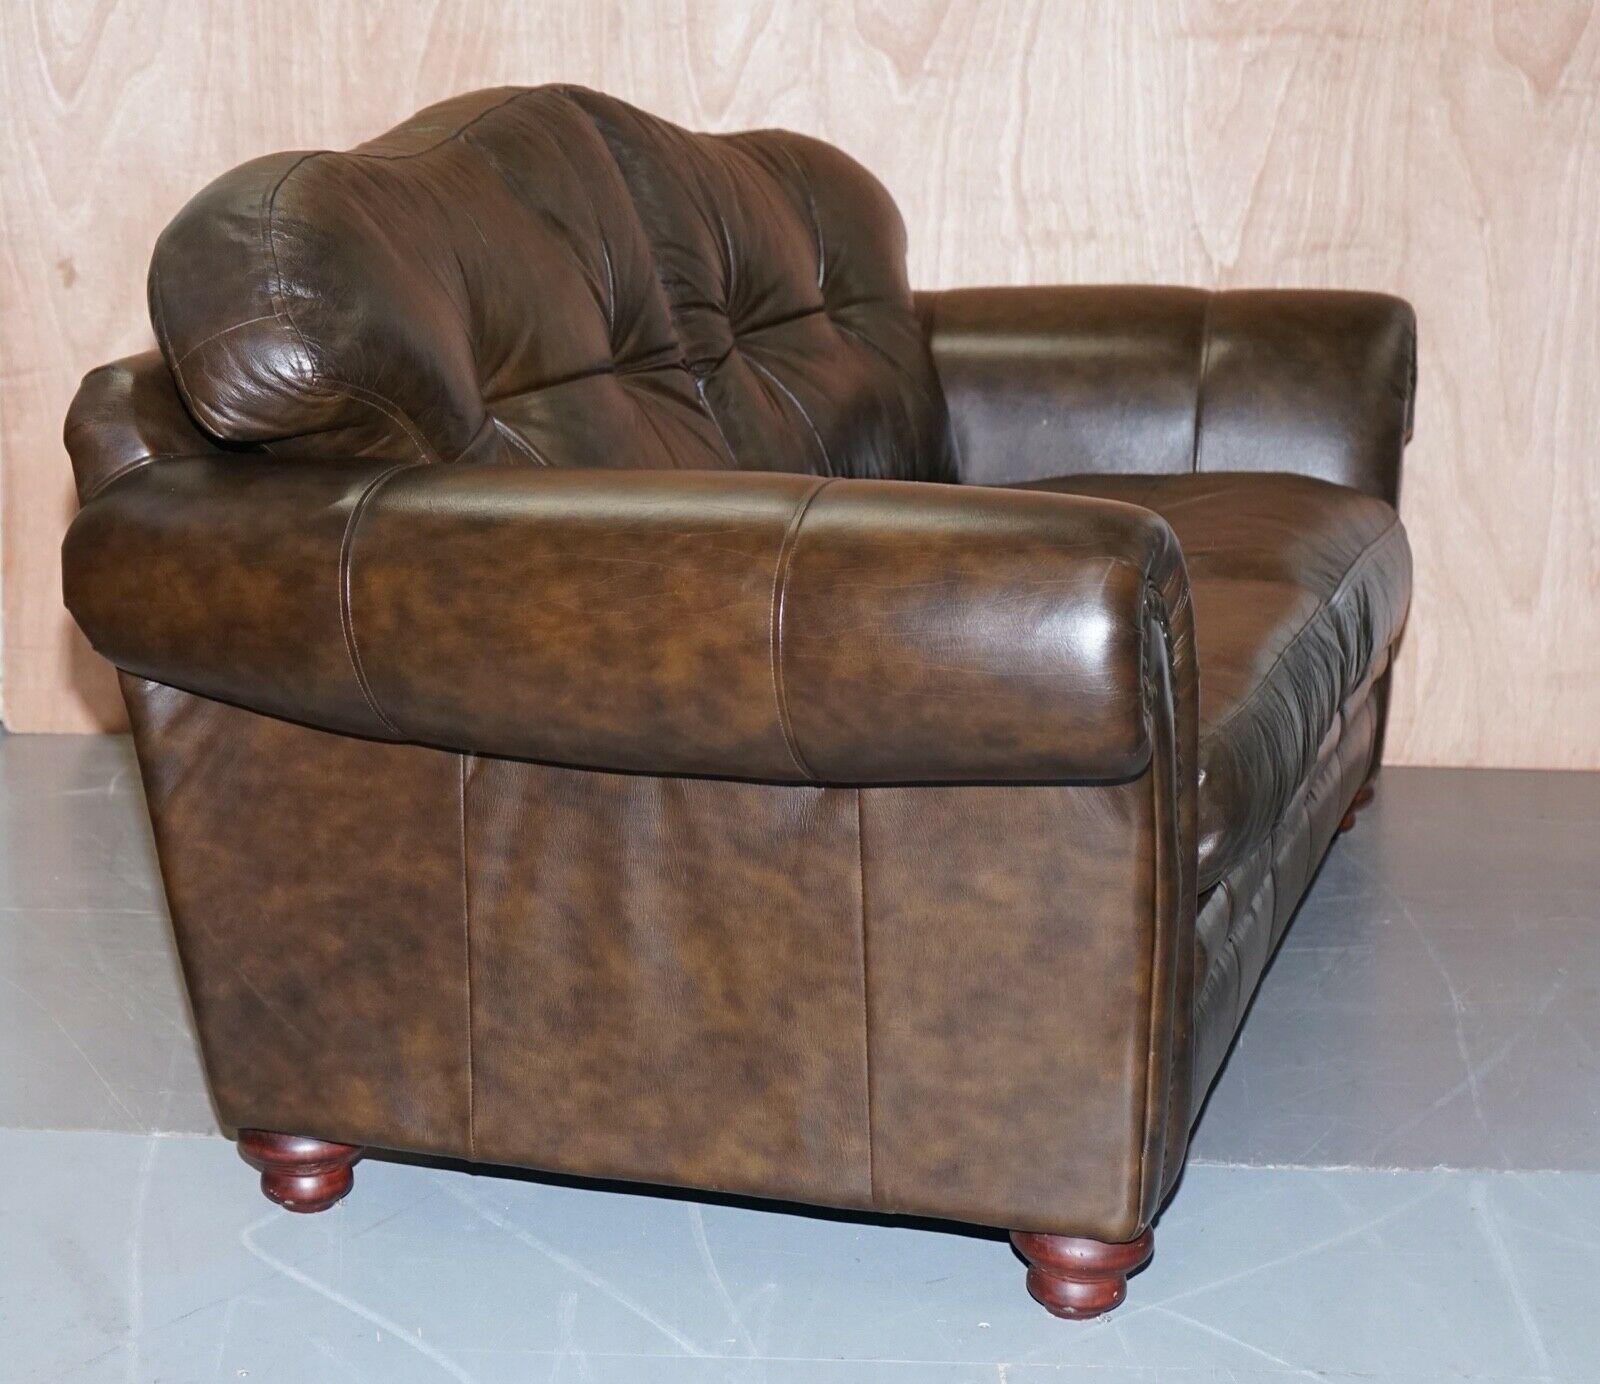 Lovely Tetrad Brown Leather 2 Seater Chesterfield Sofa with Scroll Arms 1